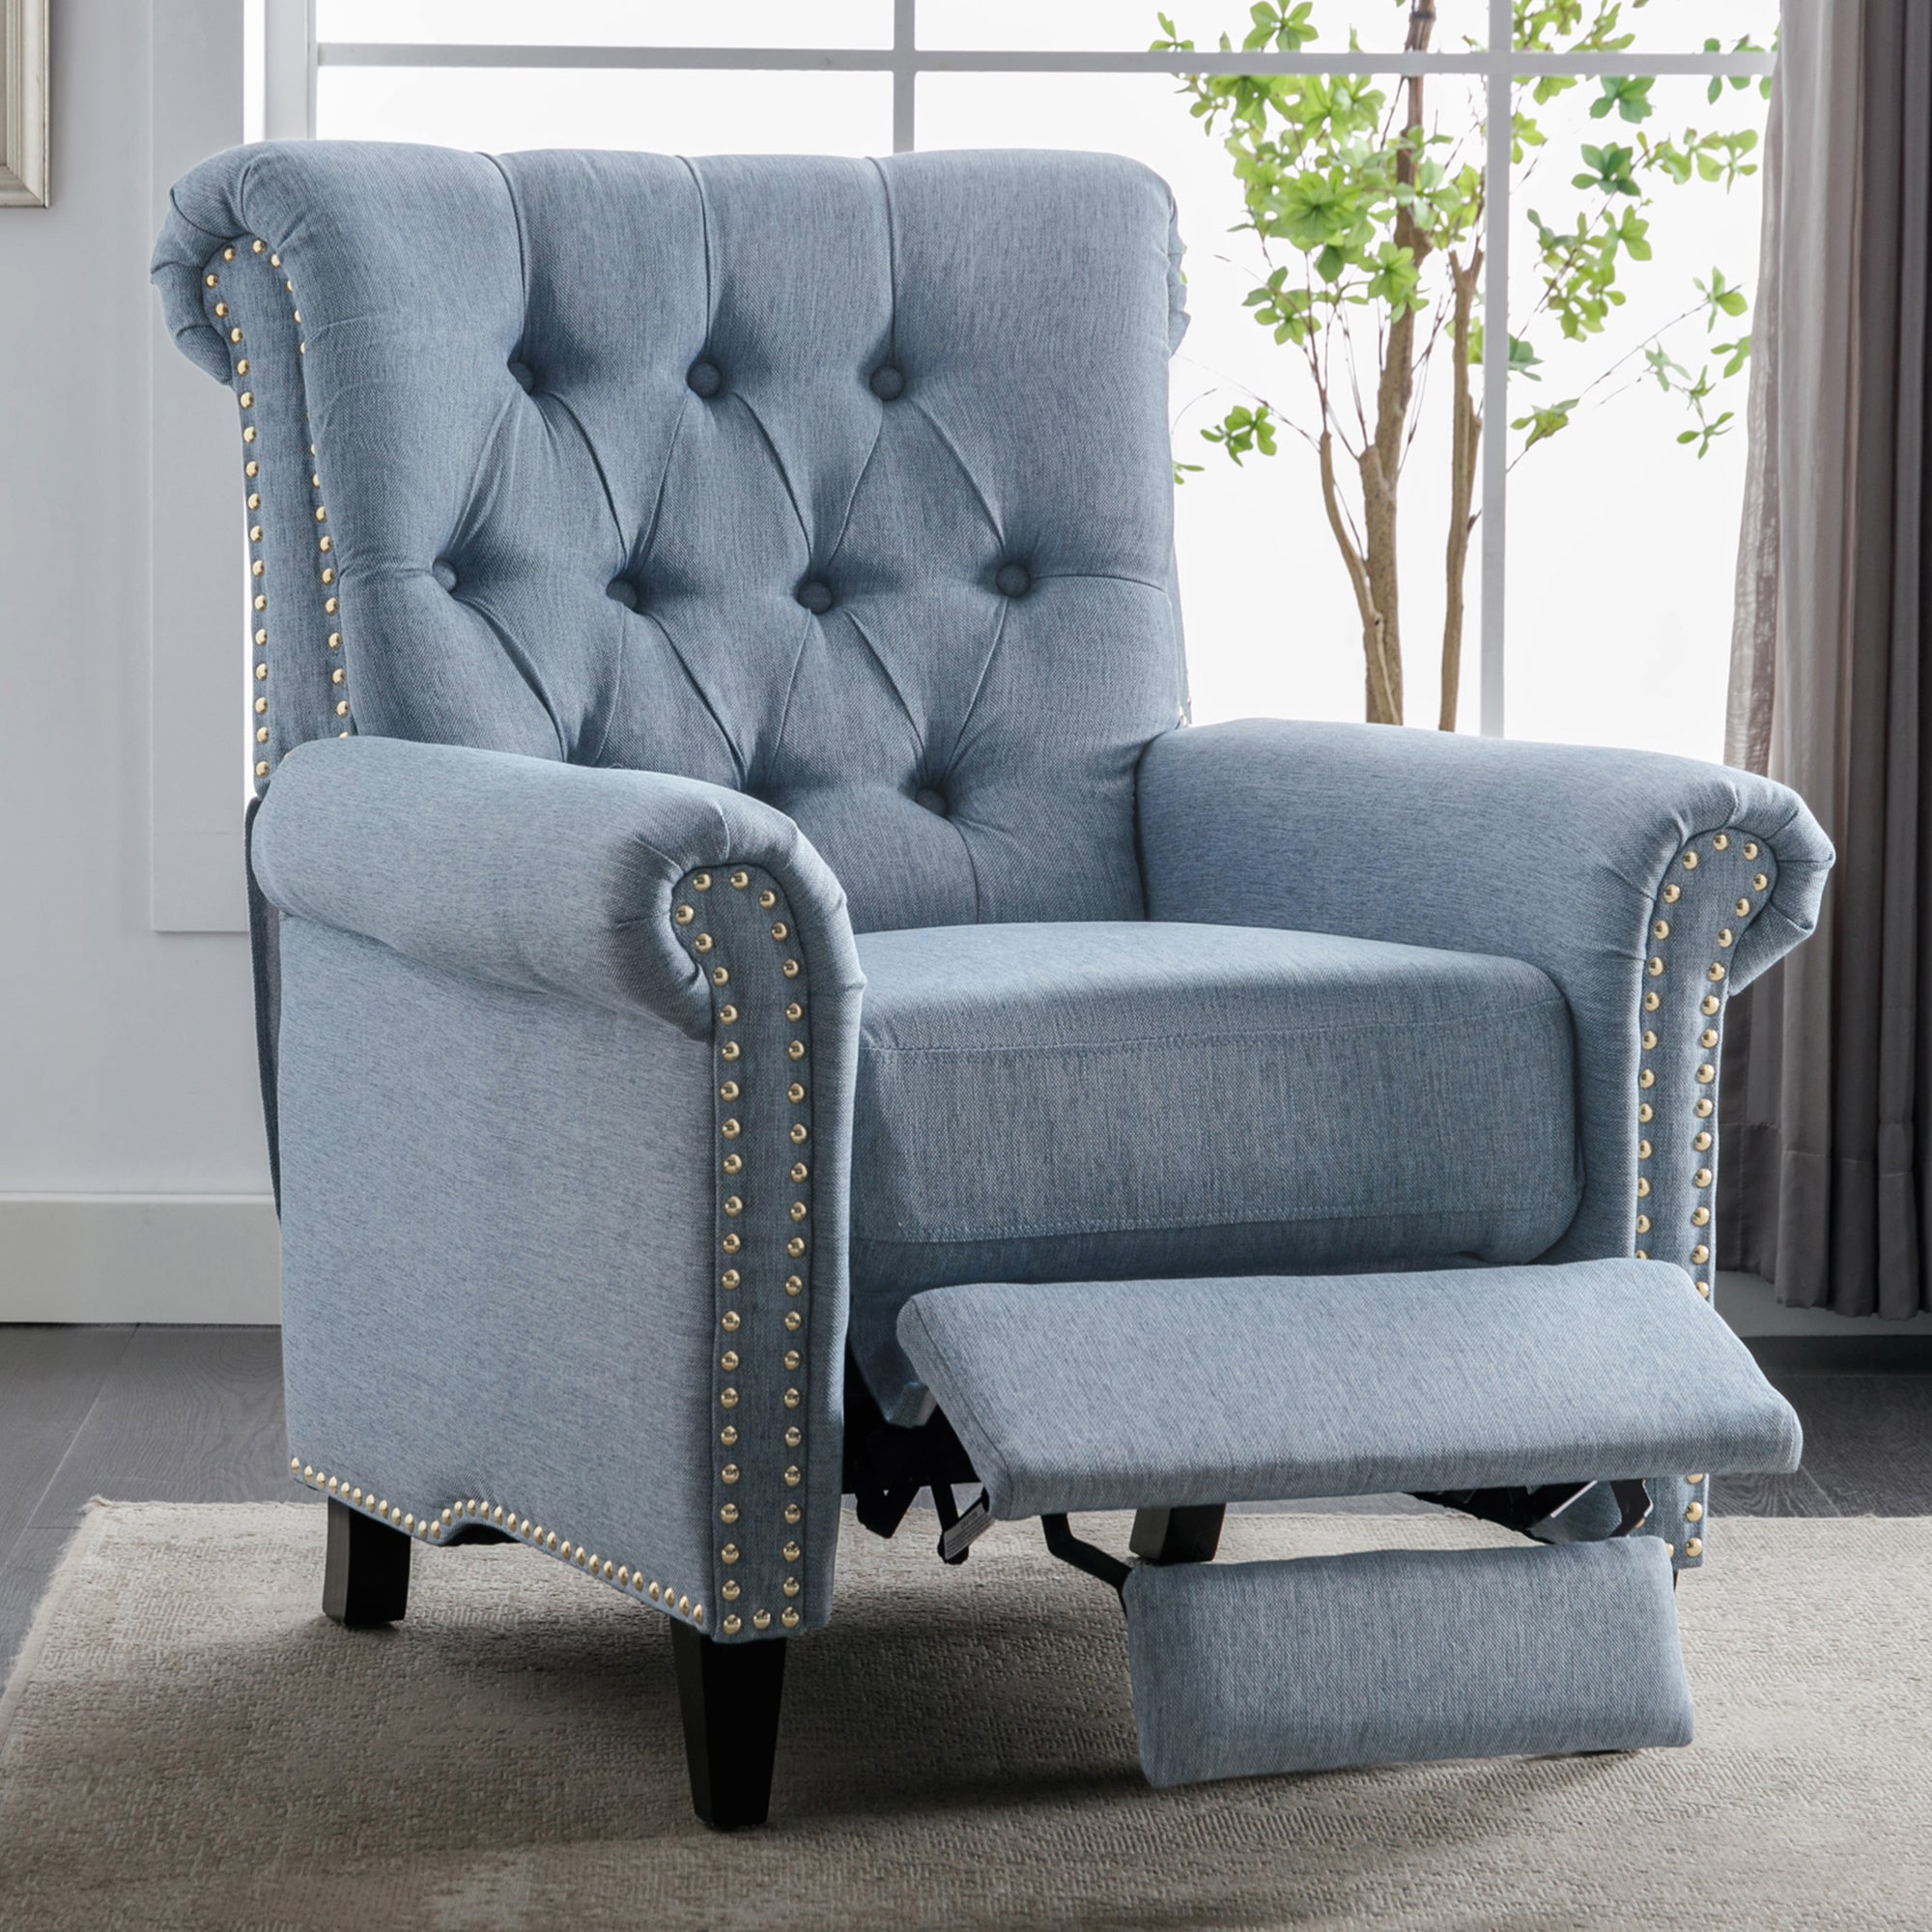 Pushback Linen Tufted Recliner Single Sofa with Nailheads Roll Arm for Living Room, Bedroom, Office, Blue